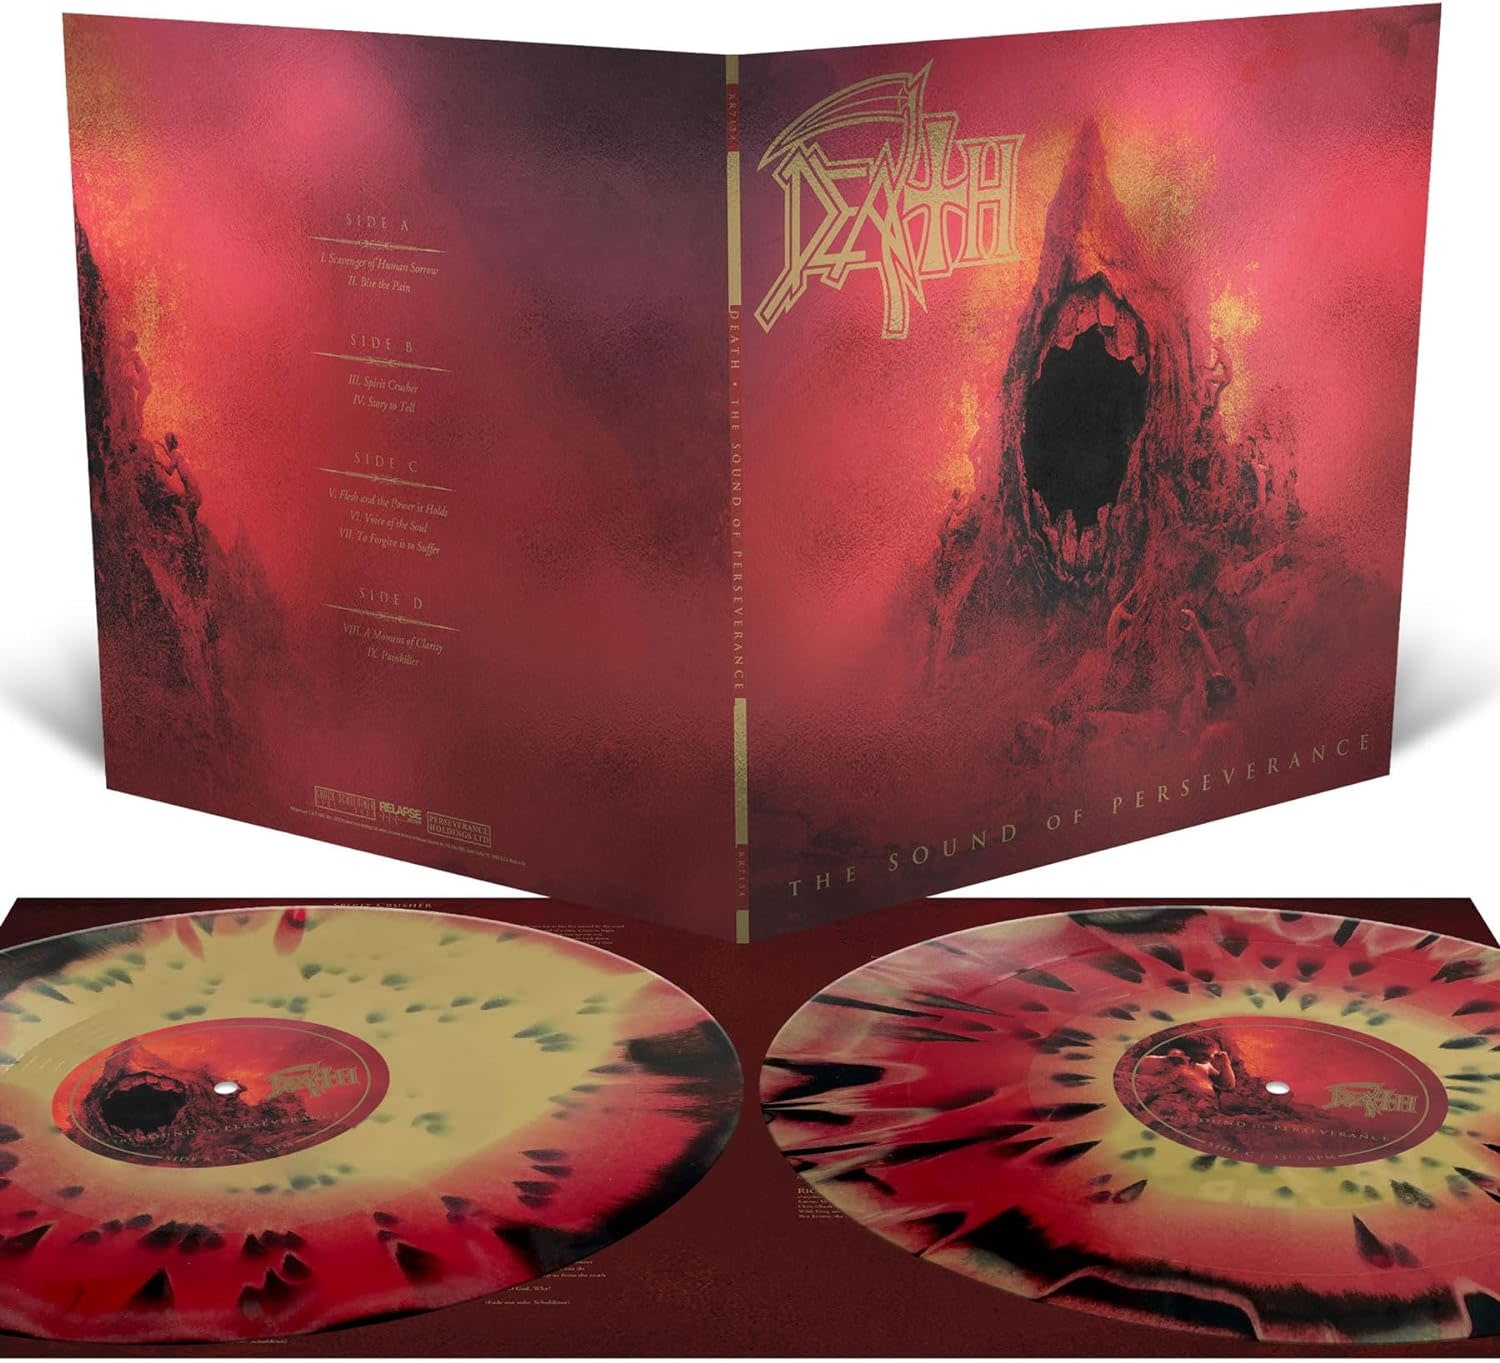 Metal Death - The Sound Of Perseverance (Black, Red, Gold Tri-Colour With Splatter)